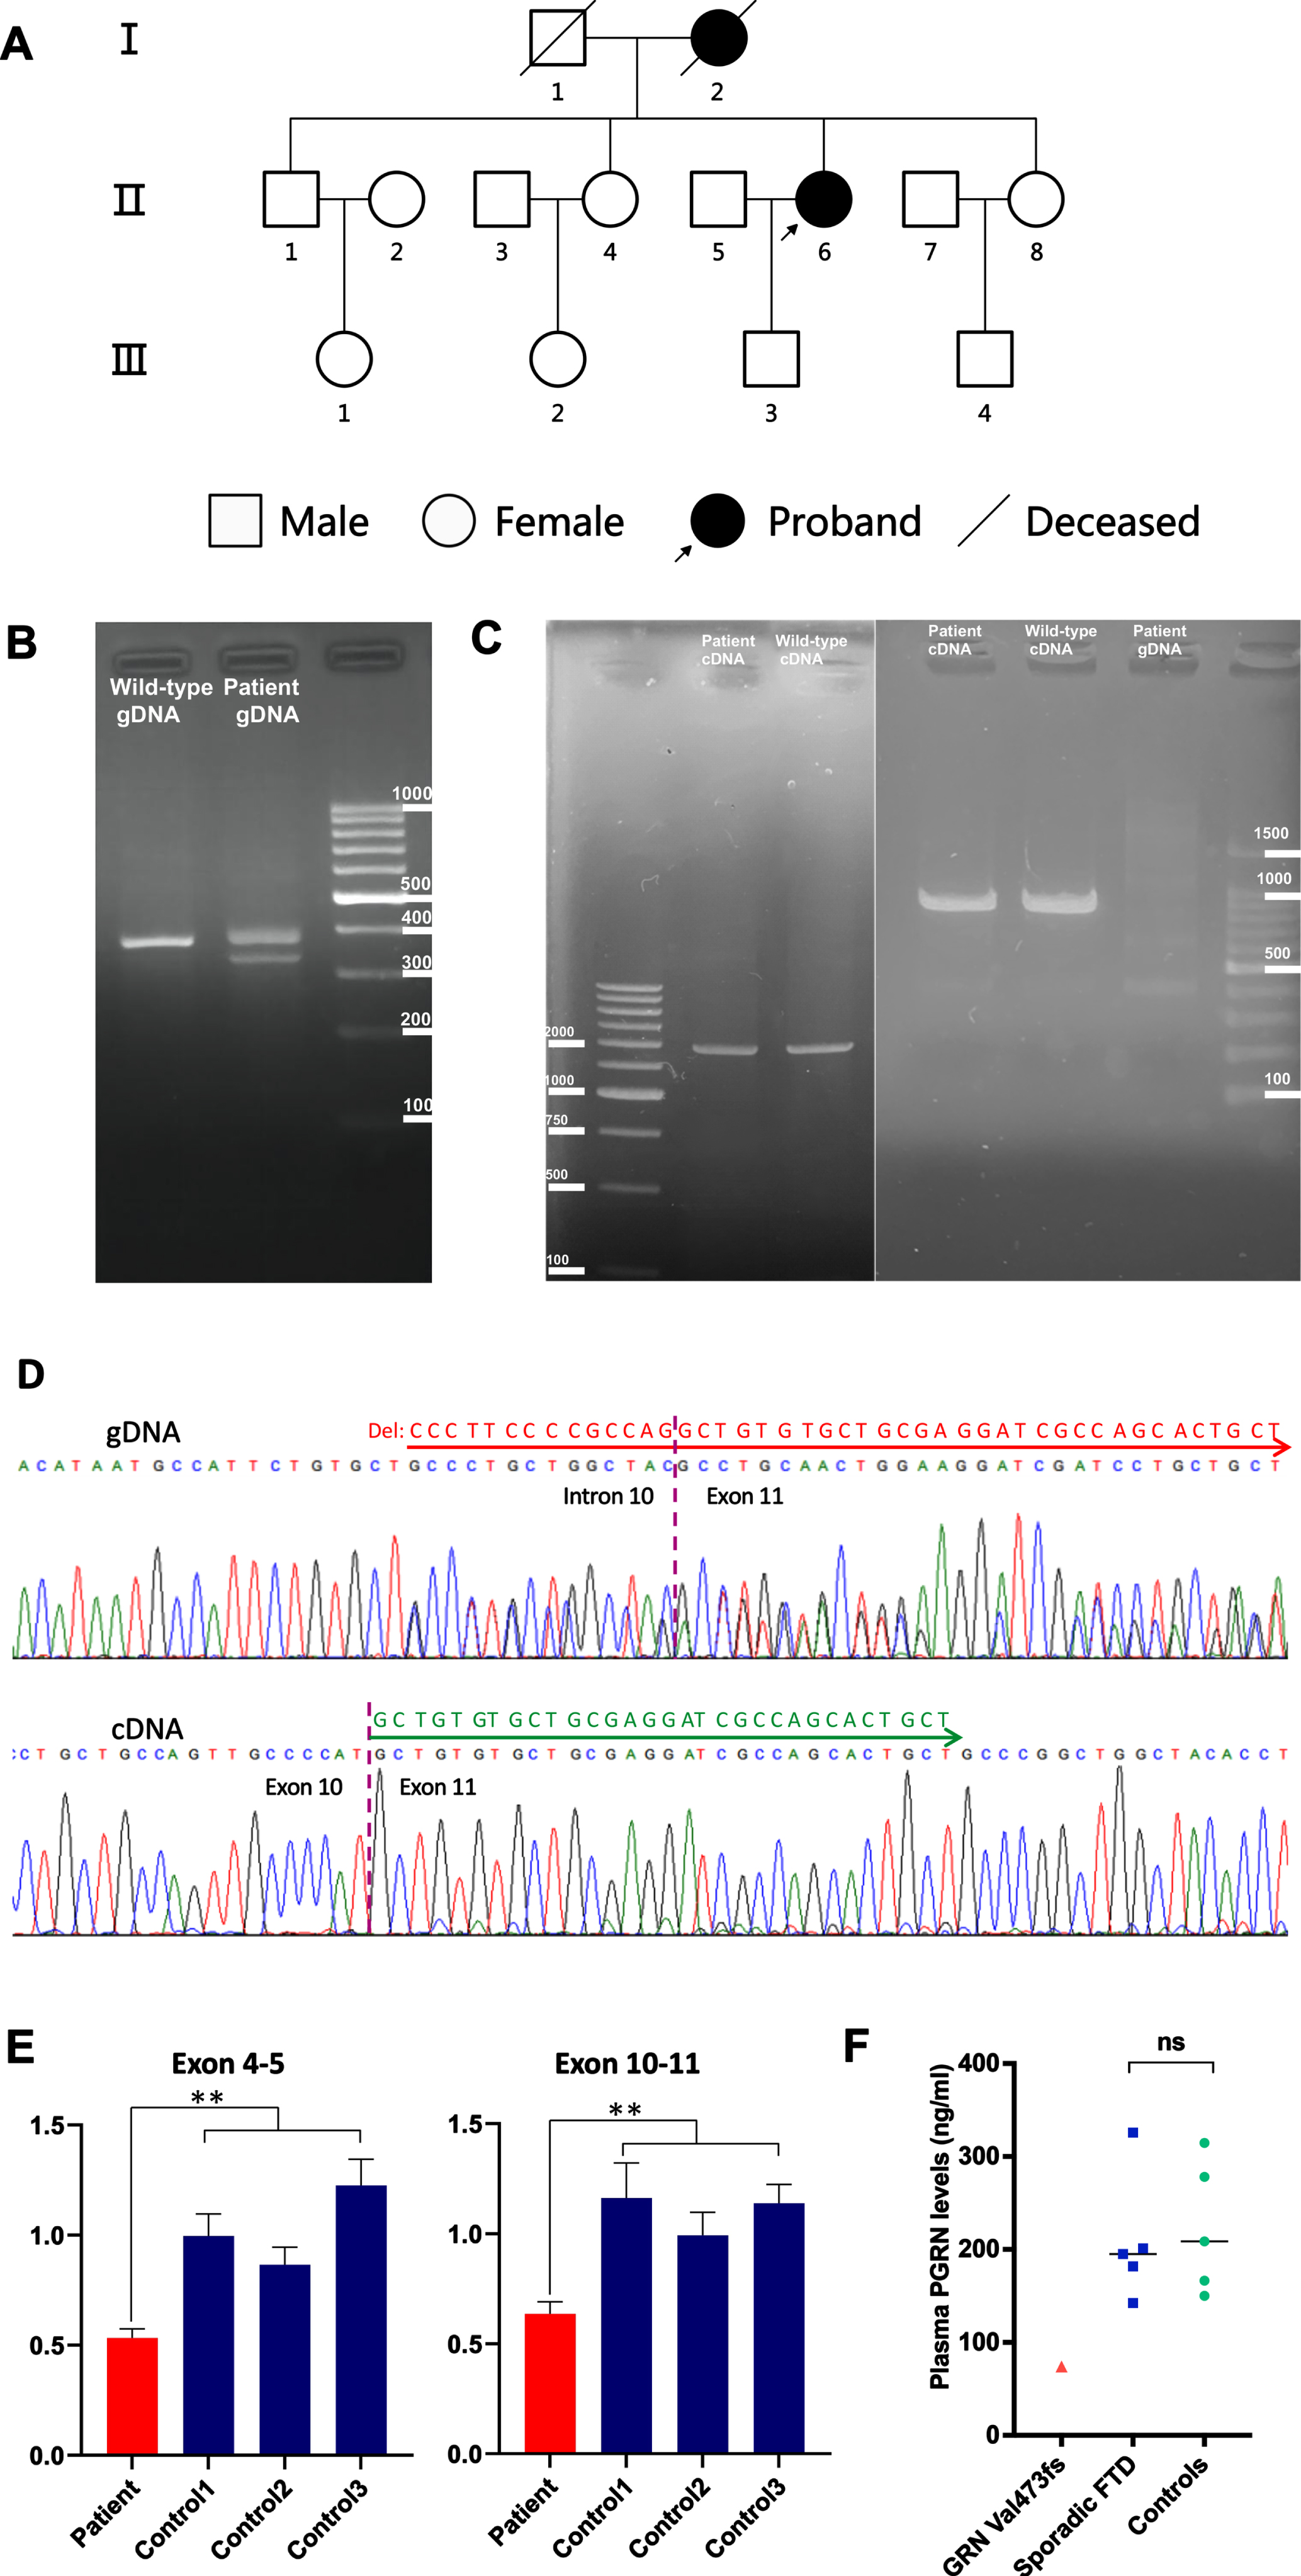 Genetic analysis of the GRN gene. A) Pedigree of the patient with GRN mutation. B) PCR amplification products across the deletion at the intron 10/exon 11 boundary of GRN from the patient and a wild-type control were examined by agarose gel electrophoresis. The 367-bp band corresponds to the wild-type allele. A 322-bp fragment corresponding to the heterozygous mutated allele with the 45-bp deletion was amplified from the gDNA of the patient. C) Left panel: Agarose gel electrophoresis of the long-range RT-PCR products revealing only the 2081-bp cDNA fragment corresponding to the predicted canonical transcripts in both the patient and control subject. Right panel: Agarose gel electrophoresis of shorter RT-PCR products showing only the 1071-bp band expected in both the patient and control. cDNA, complementary DNA; gDNA, genomic DNA. D) Upper lane: Sequence analysis of the gDNA PCR product of the patient revealed a c.1414-14_1444delCCCTTCCCCGCCAGGCTGTGTGCTGCGAGGATCGCCAGCACTGCT mutation in heterozygous state. Lower lane: Sanger sequencing of the RT-PCR products of the patient revealed the canonical transcripts. We found a substantial reduction in the amount of mutant allele which is virtually absent. E) GRN gene expression was analyzed by qRT-PCR using total RNA extracted from peripheral leukocytes of the patient with primer sets corresponding to sequences within exons 4–5 (left panel) and exons 10–11 (right panel). A –∼50% decrease in the GRN product (normalized to RPS17 level) was observed in the patient compared with the same product in the 3 wild-type control subjects. Data are expressed as Mean±SD of 3 independent experiments. **p < 0.01 (Mann–Whitney U test). F) Plasma PGRN levels (ng/ml) in the patient carrying the GRN Val473fs mutation (red triangle), 5 FTD patients without GRN mutations (blue squares), and 5 healthy control subjects (green circles). Each data point represents an individual. Black horizontal lines indicate the median plasma PGRN levels of FTD patients without GRN mutations and healthy controls.